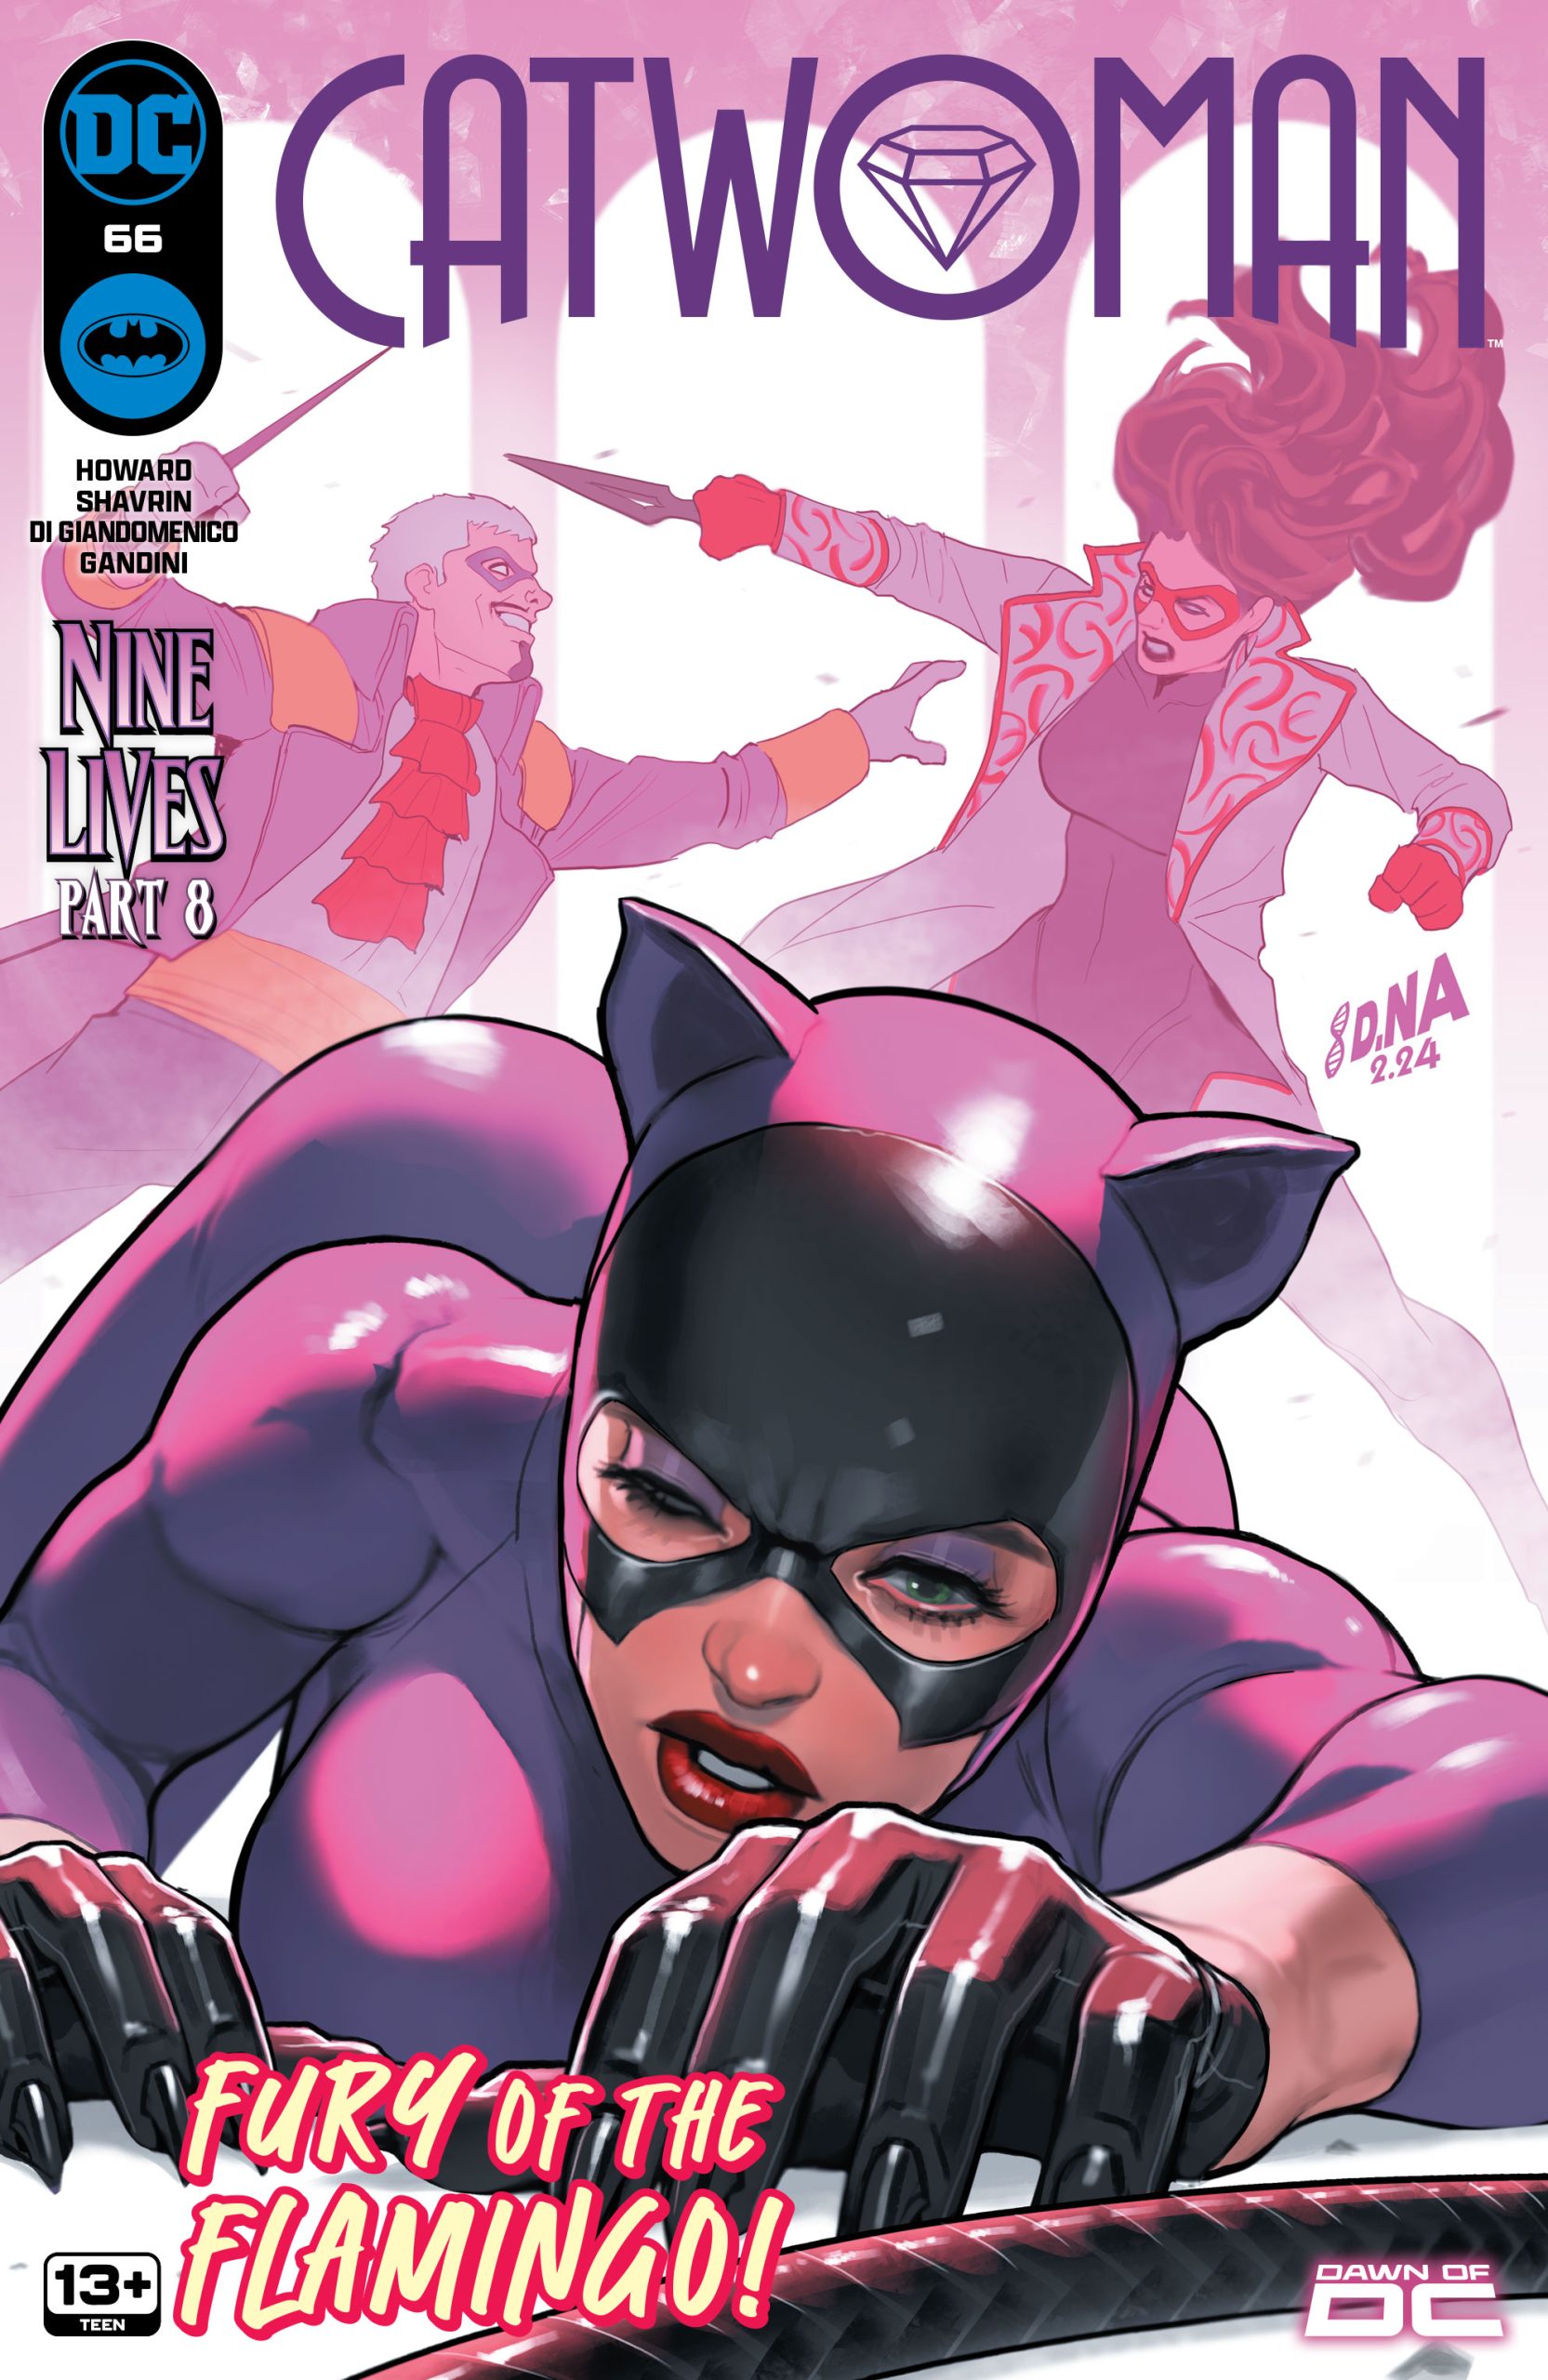 DC Preview: Catwoman #66